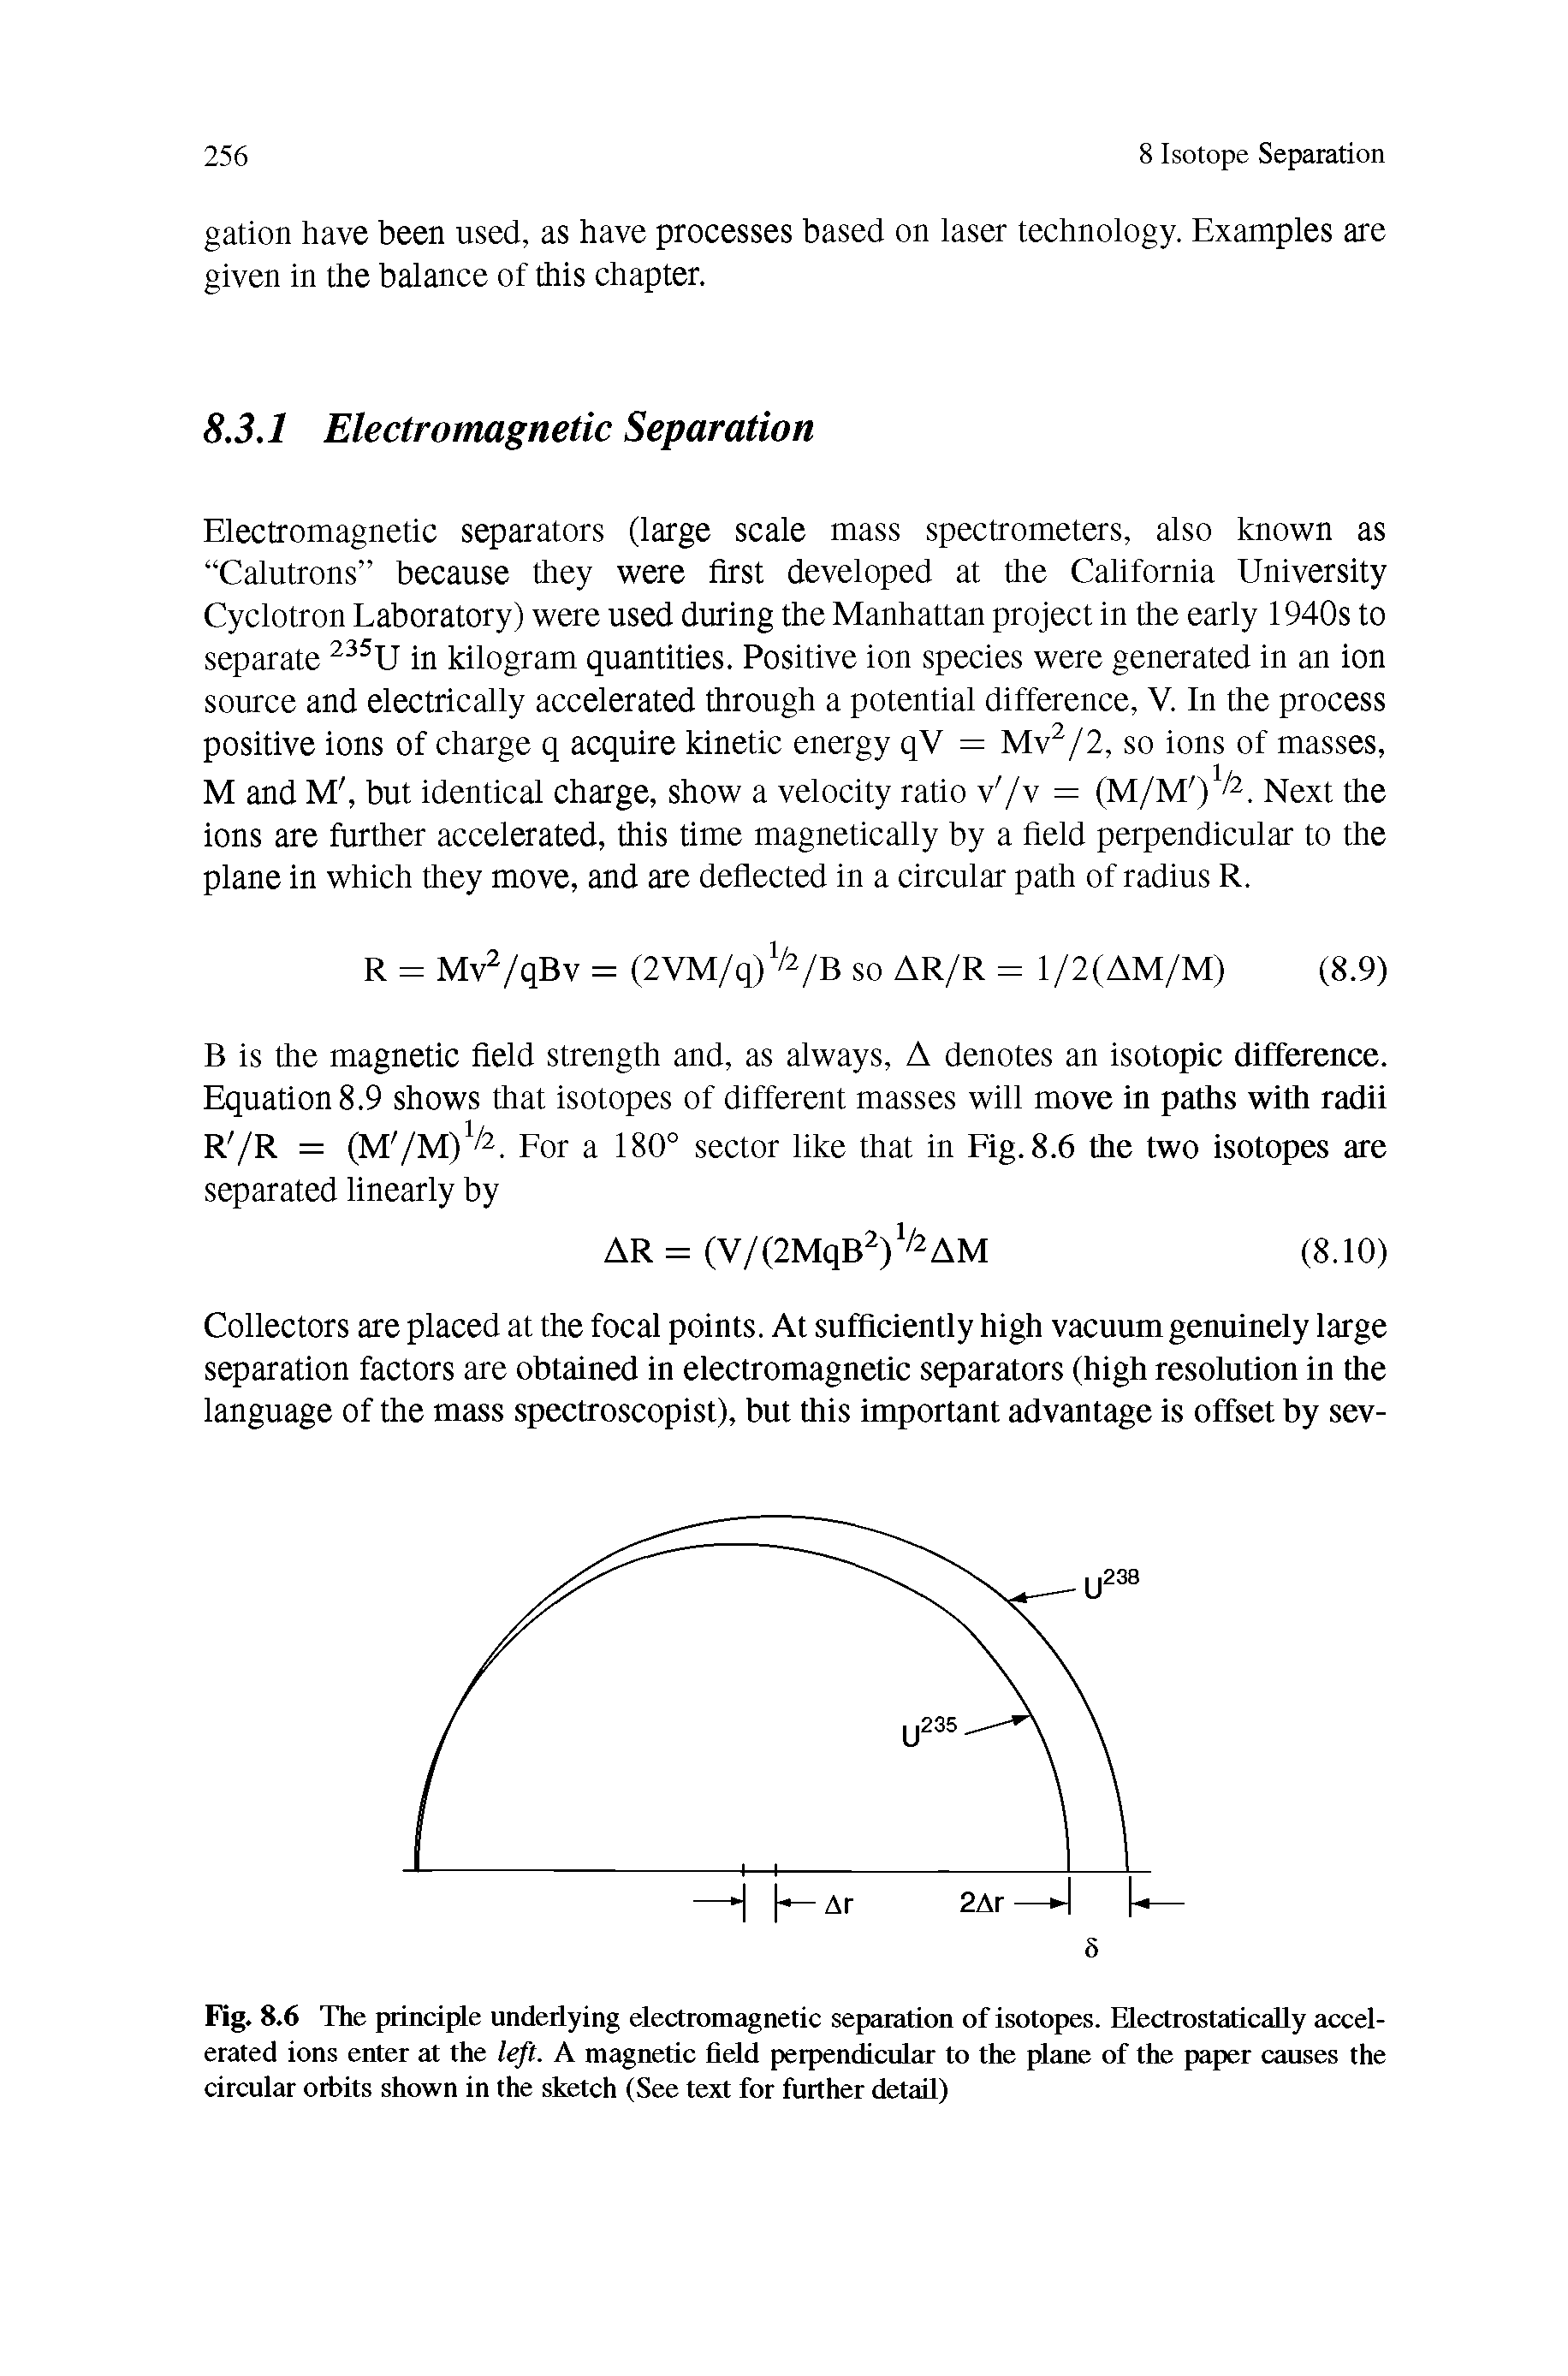 Fig. 8.6 The principle underlying electromagnetic separation of isotopes. Electrostatically accelerated ions enter at the left. A magnetic field perpendicular to the plane of the paper causes the circular orbits shown in the sketch (See text for further detail)...